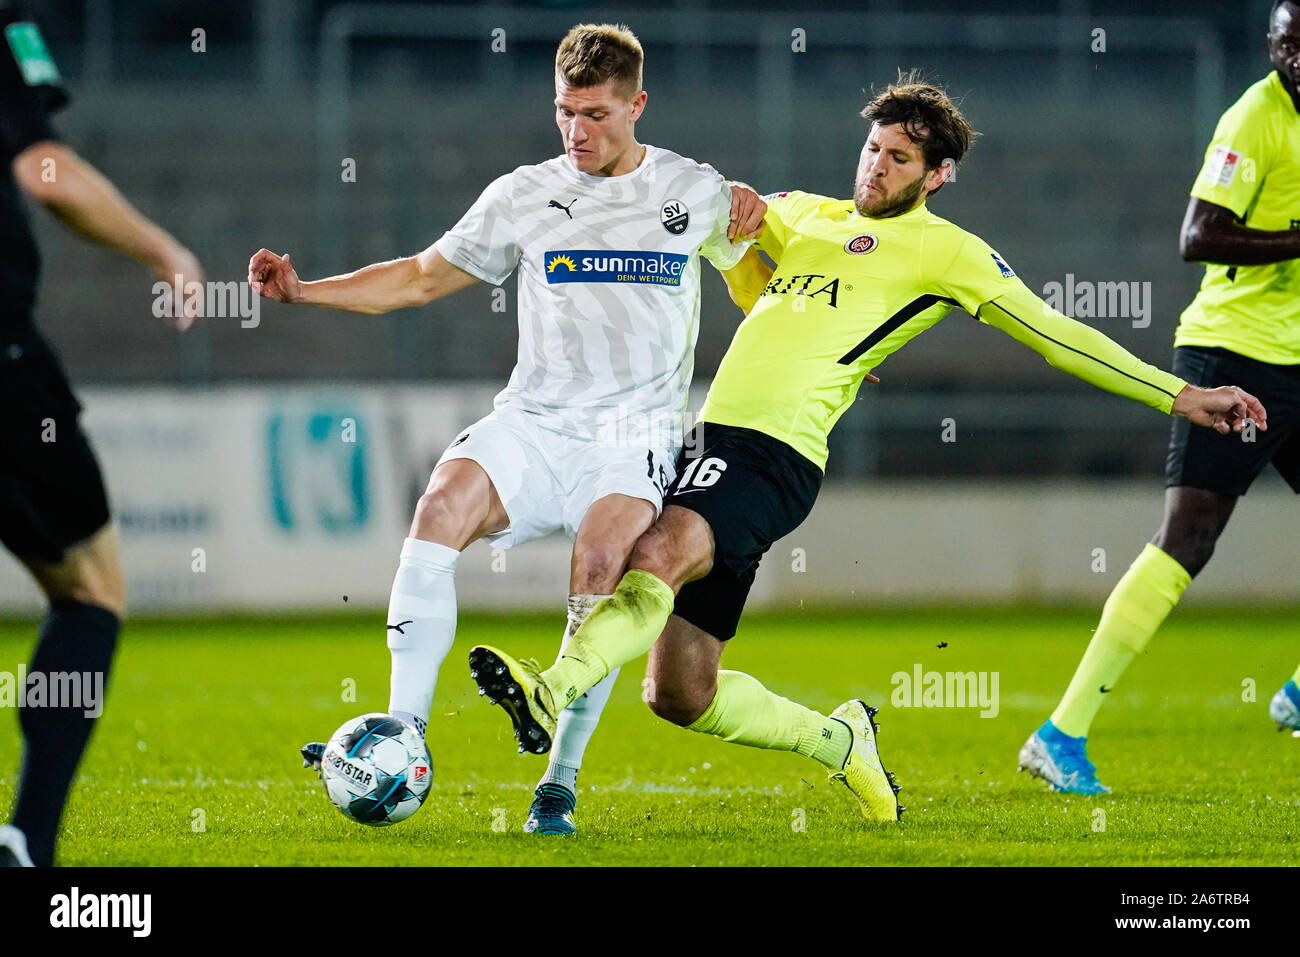 28 October 2019, Baden-Wuerttemberg, Sandhausen: Soccer: 2nd Bundesliga, SV Sandhausen - SV Wehen Wiesbaden, 11th matchday, in the Hardtwaldstadion. Sandhausens Kevin Behrens (l) and Wiesbadens Niklas Dams fight for the ball. Photo: Uwe Anspach/dpa - IMPORTANT NOTE: In accordance with the requirements of the DFL Deutsche Fußball Liga or the DFB Deutscher Fußball-Bund, it is prohibited to use or have used photographs taken in the stadium and/or the match in the form of sequence images and/or video-like photo sequences. Stock Photo